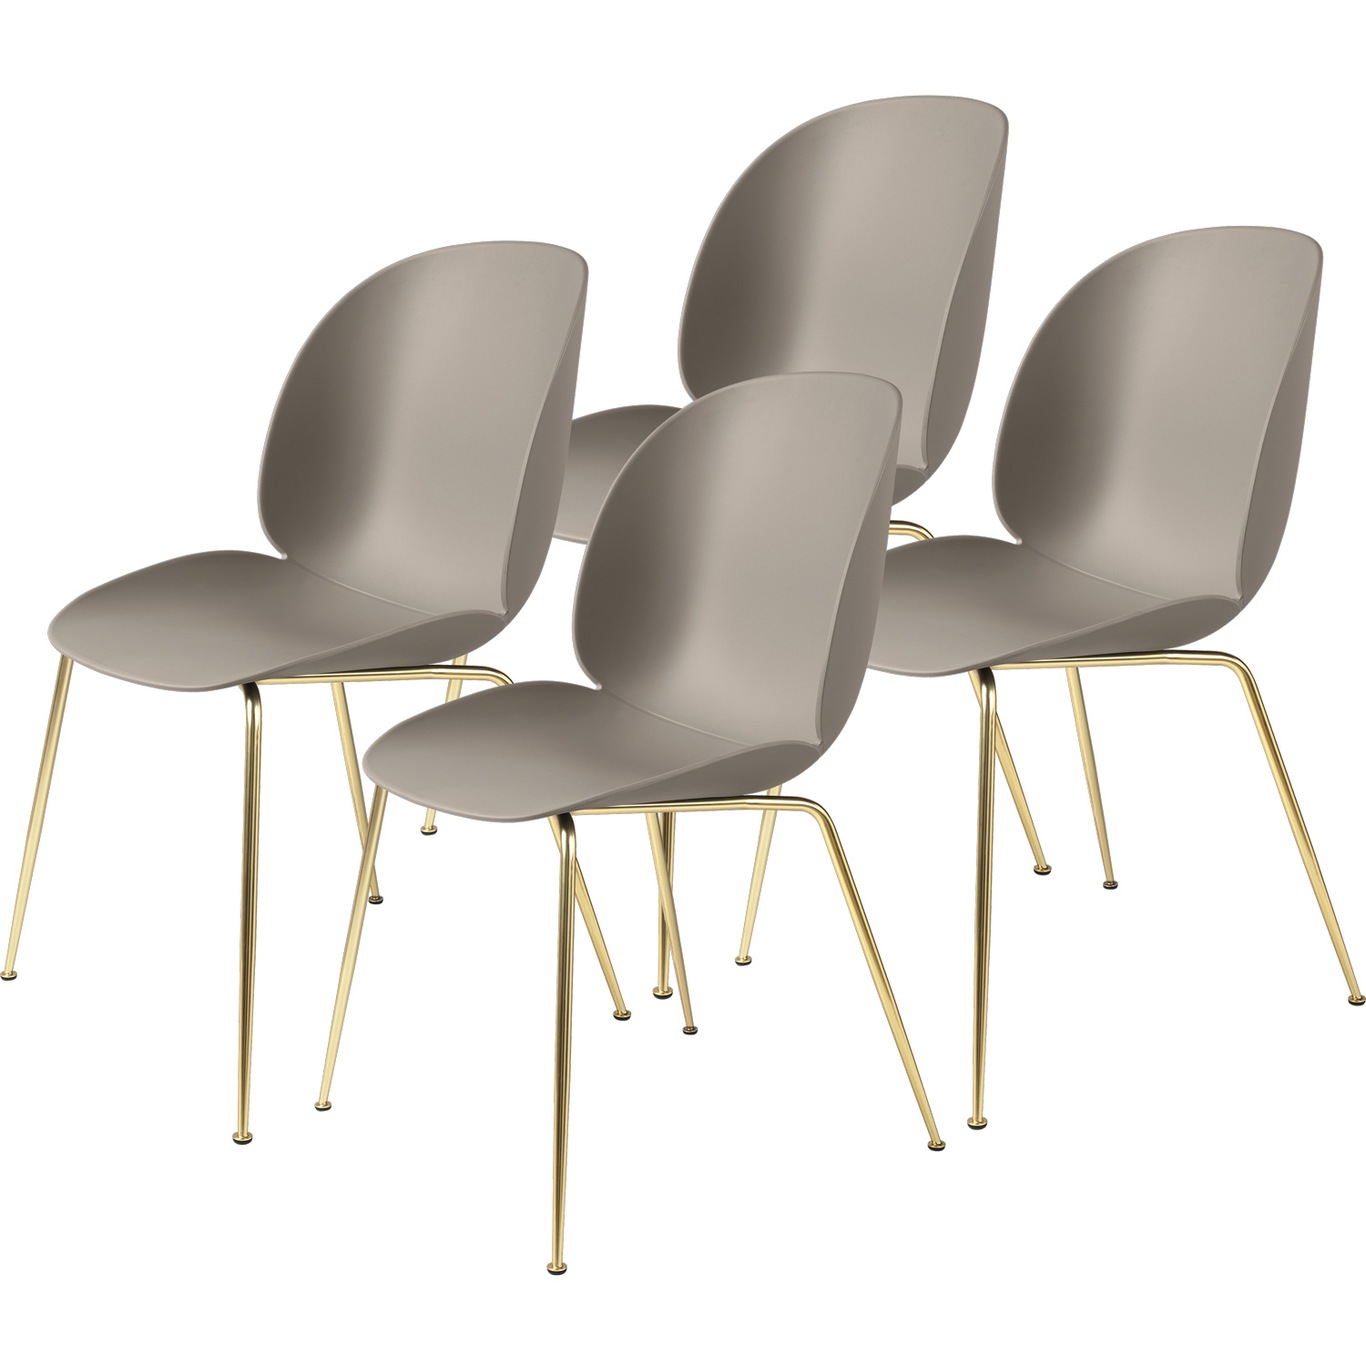 Beetle Chair Un-upholstered 4-pack Conic Base Brass, Beige